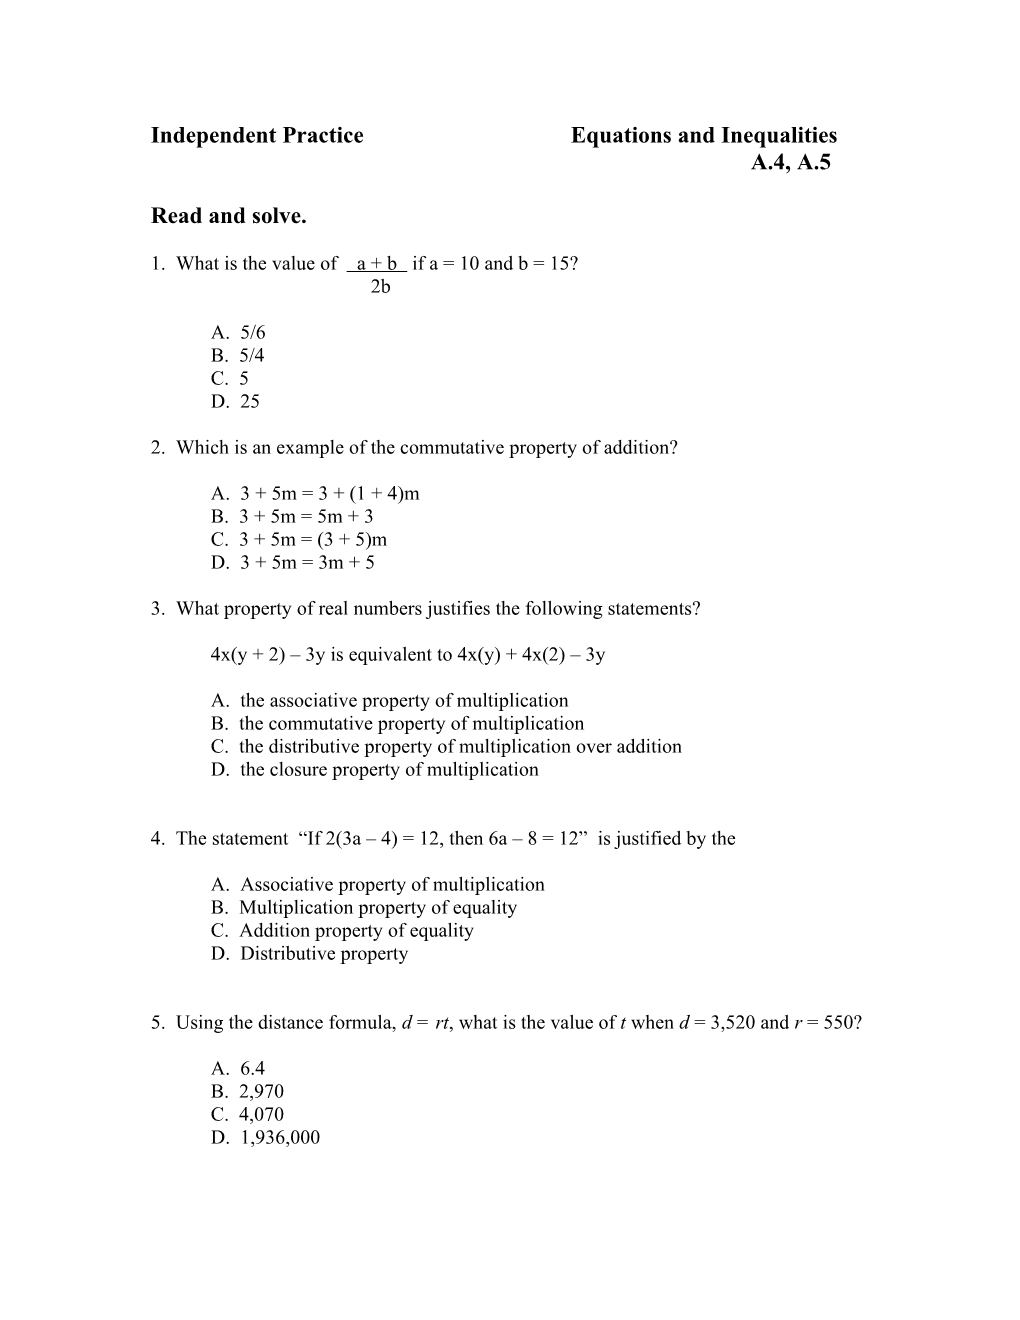 Independent Practice Equations and Inequalities A.4, A.5